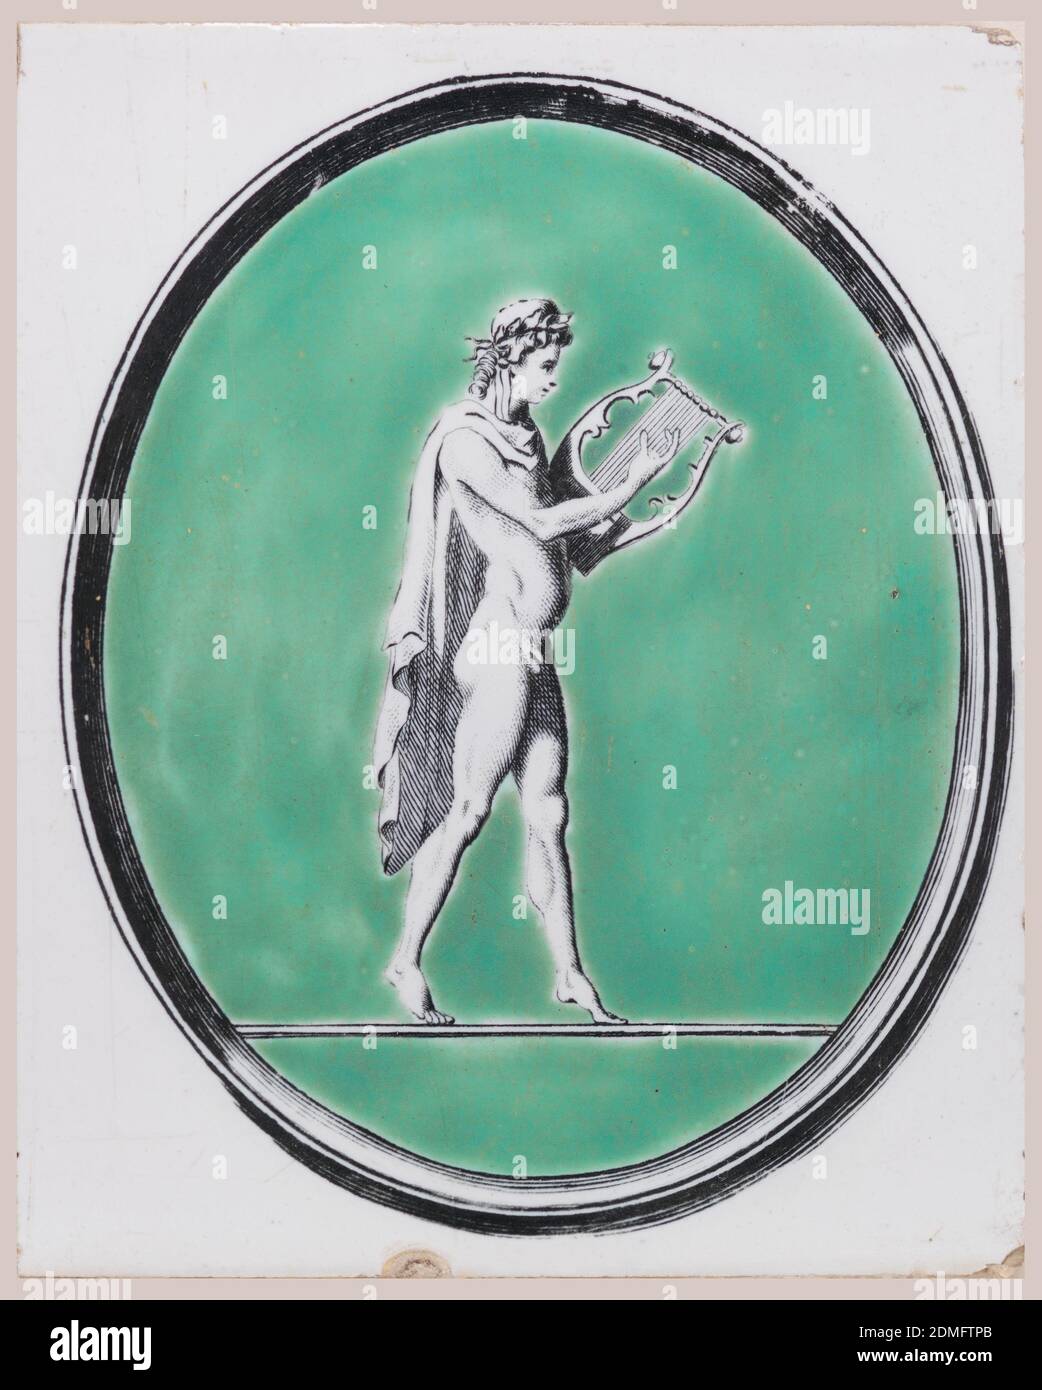 Tile, Transfer-printed, green-enamelled white pottery, Vertical rectangle. White glazed ground; upright oval black transfer-printed frame enclosing green area against which, in black on white, is a figure of Orpheus or Apollo holding a lyre., Liverpool, England, ca. 1780, tiles, Decorative Arts, Tile Stock Photo